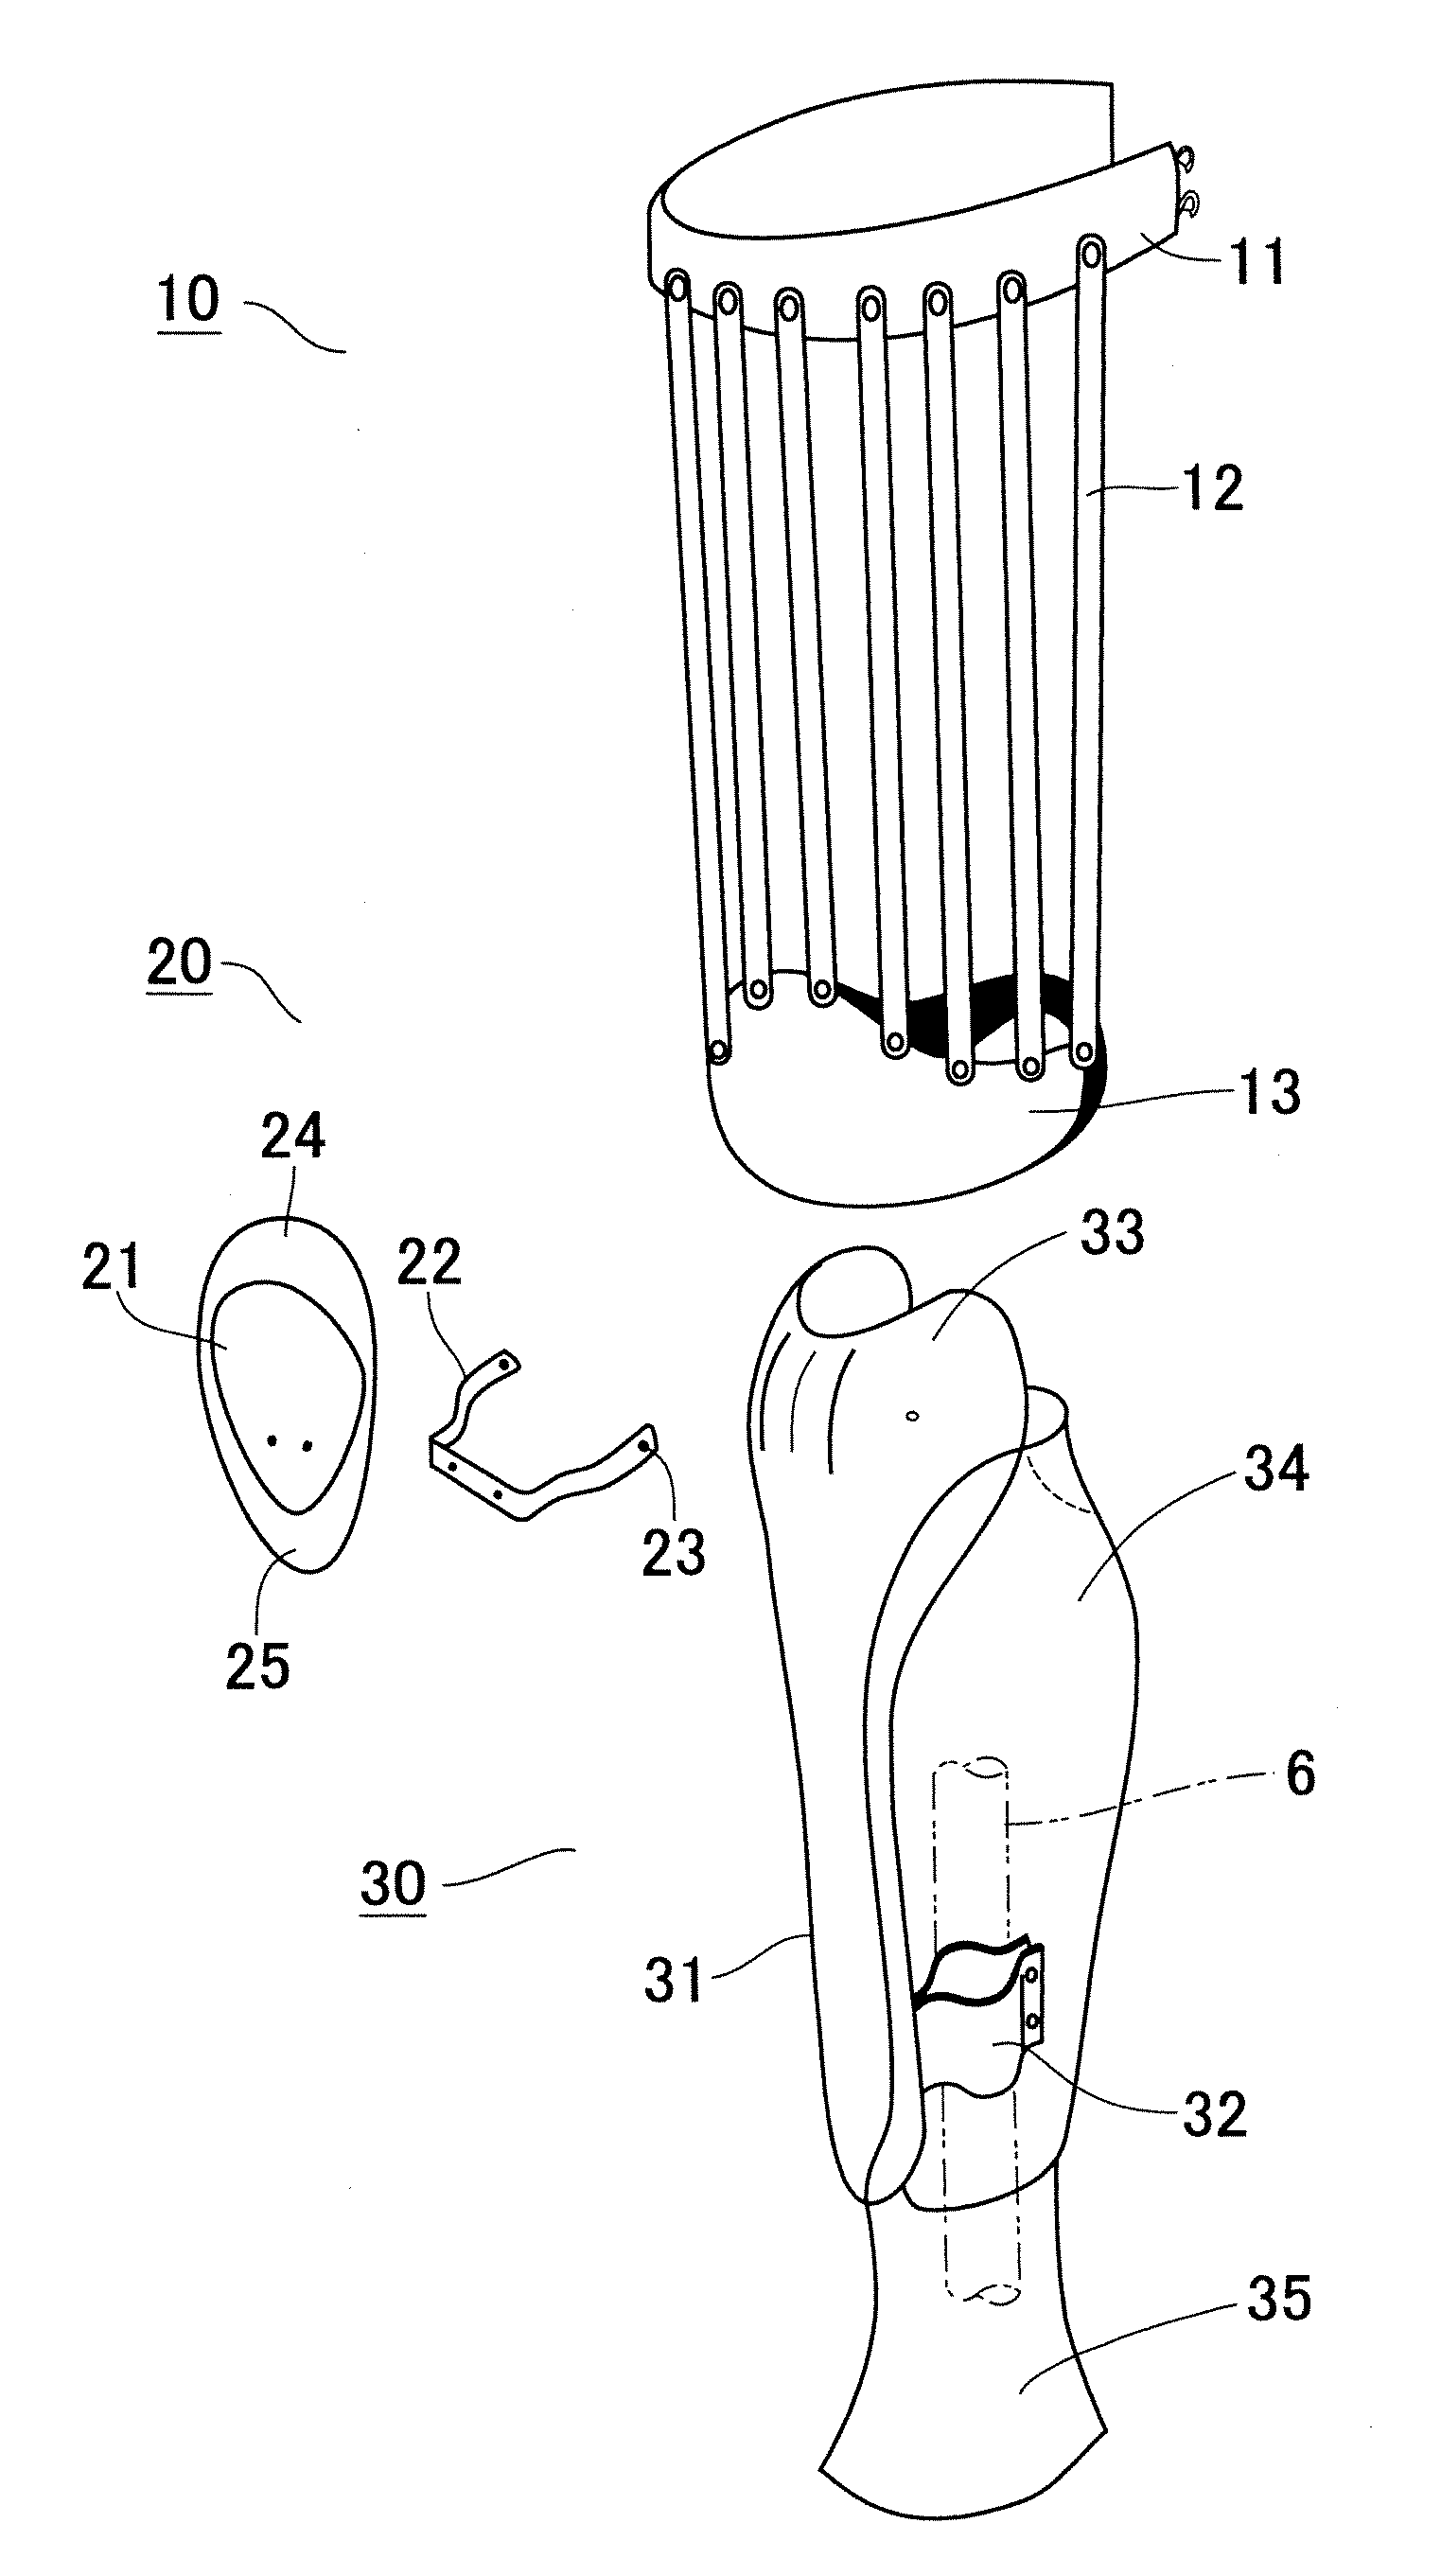 Modularized prosthesis leg cover and method for manufacturing the same